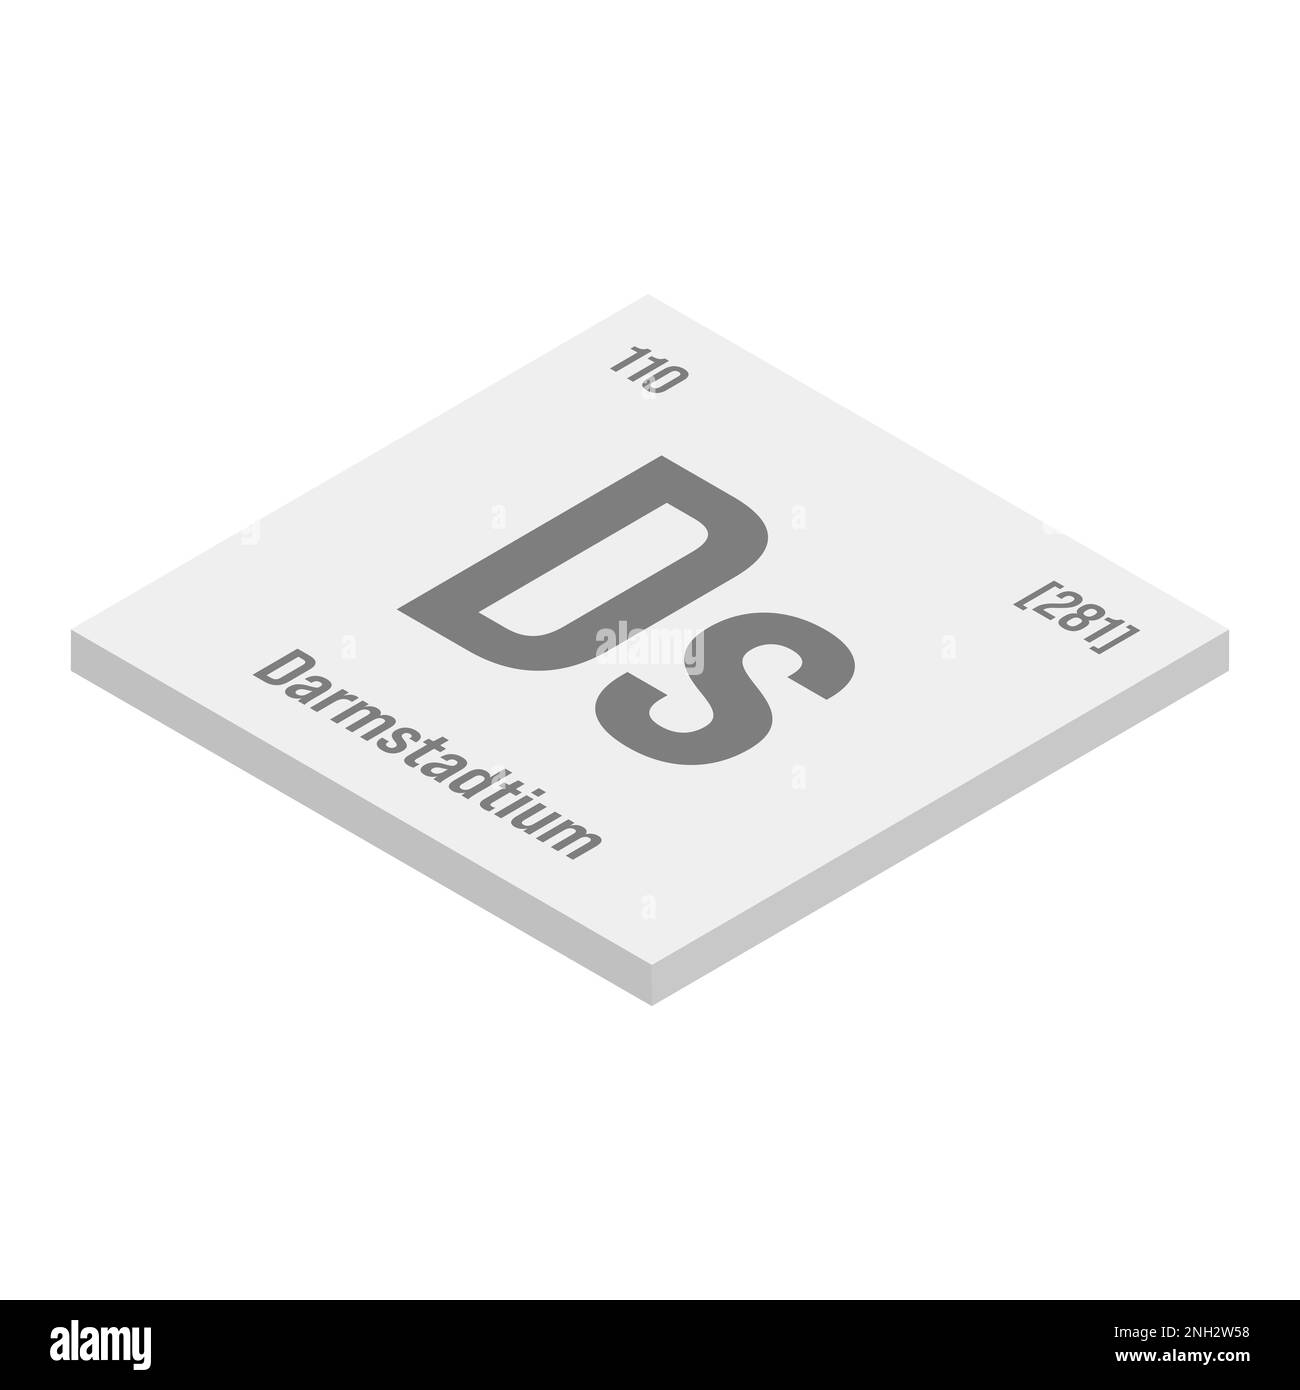 Copper, Cu, gray 3D isometric illustration of periodic table element with name, symbol, atomic number and weight. Transition metal with various industrial uses, such as in electrical wiring, plumbing, and as a component in alloys and pigments. Stock Vector